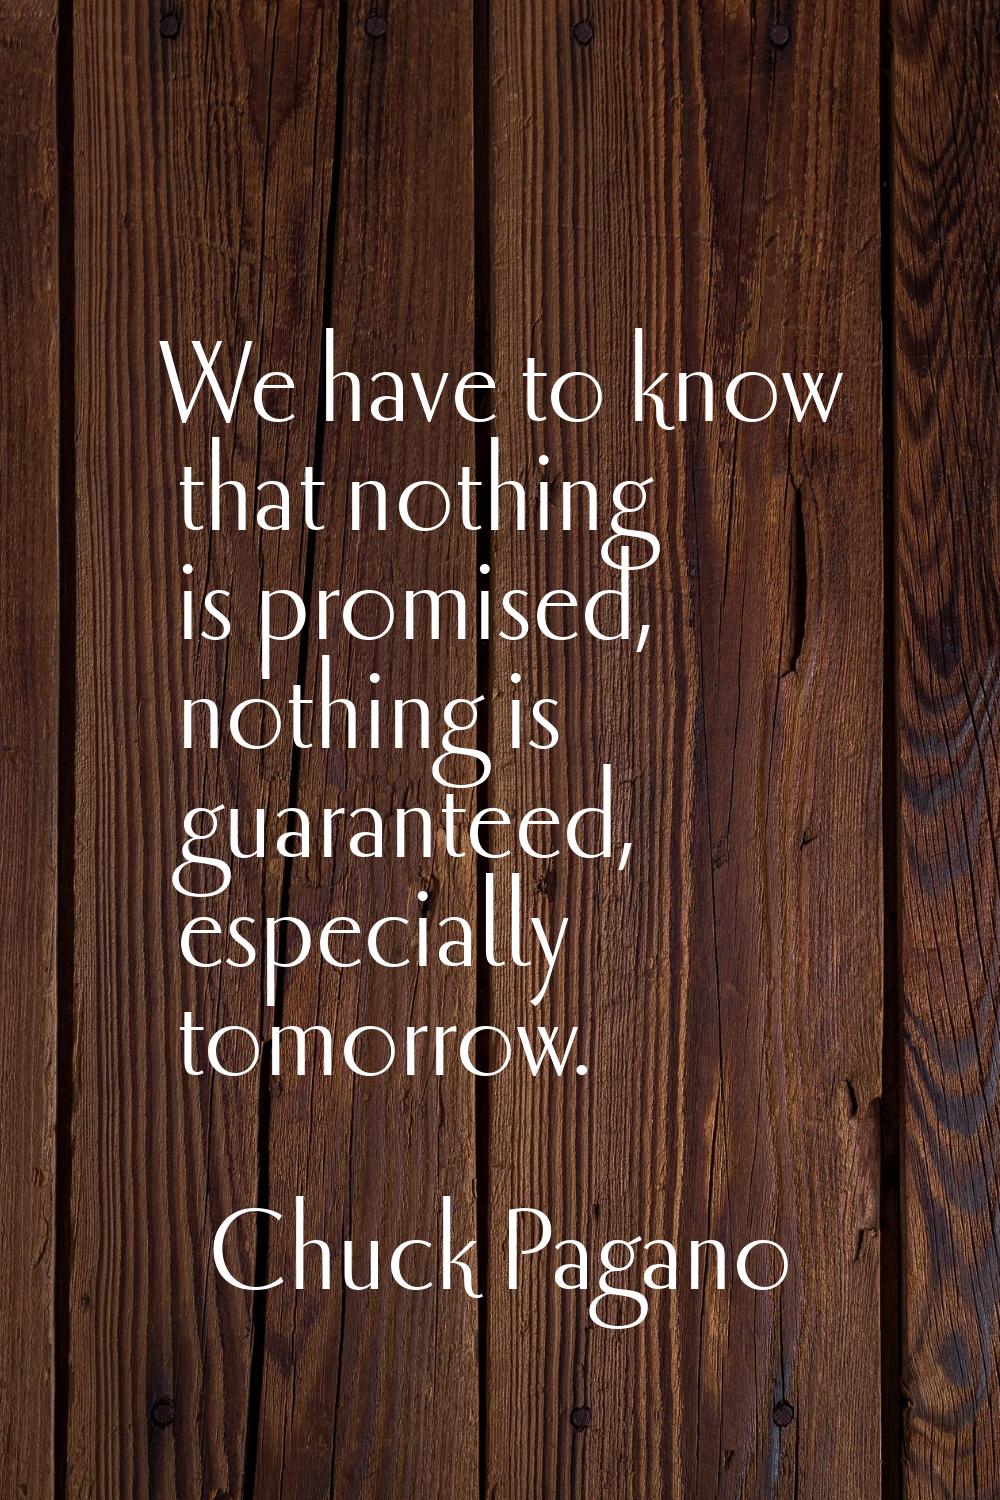 We have to know that nothing is promised, nothing is guaranteed, especially tomorrow.